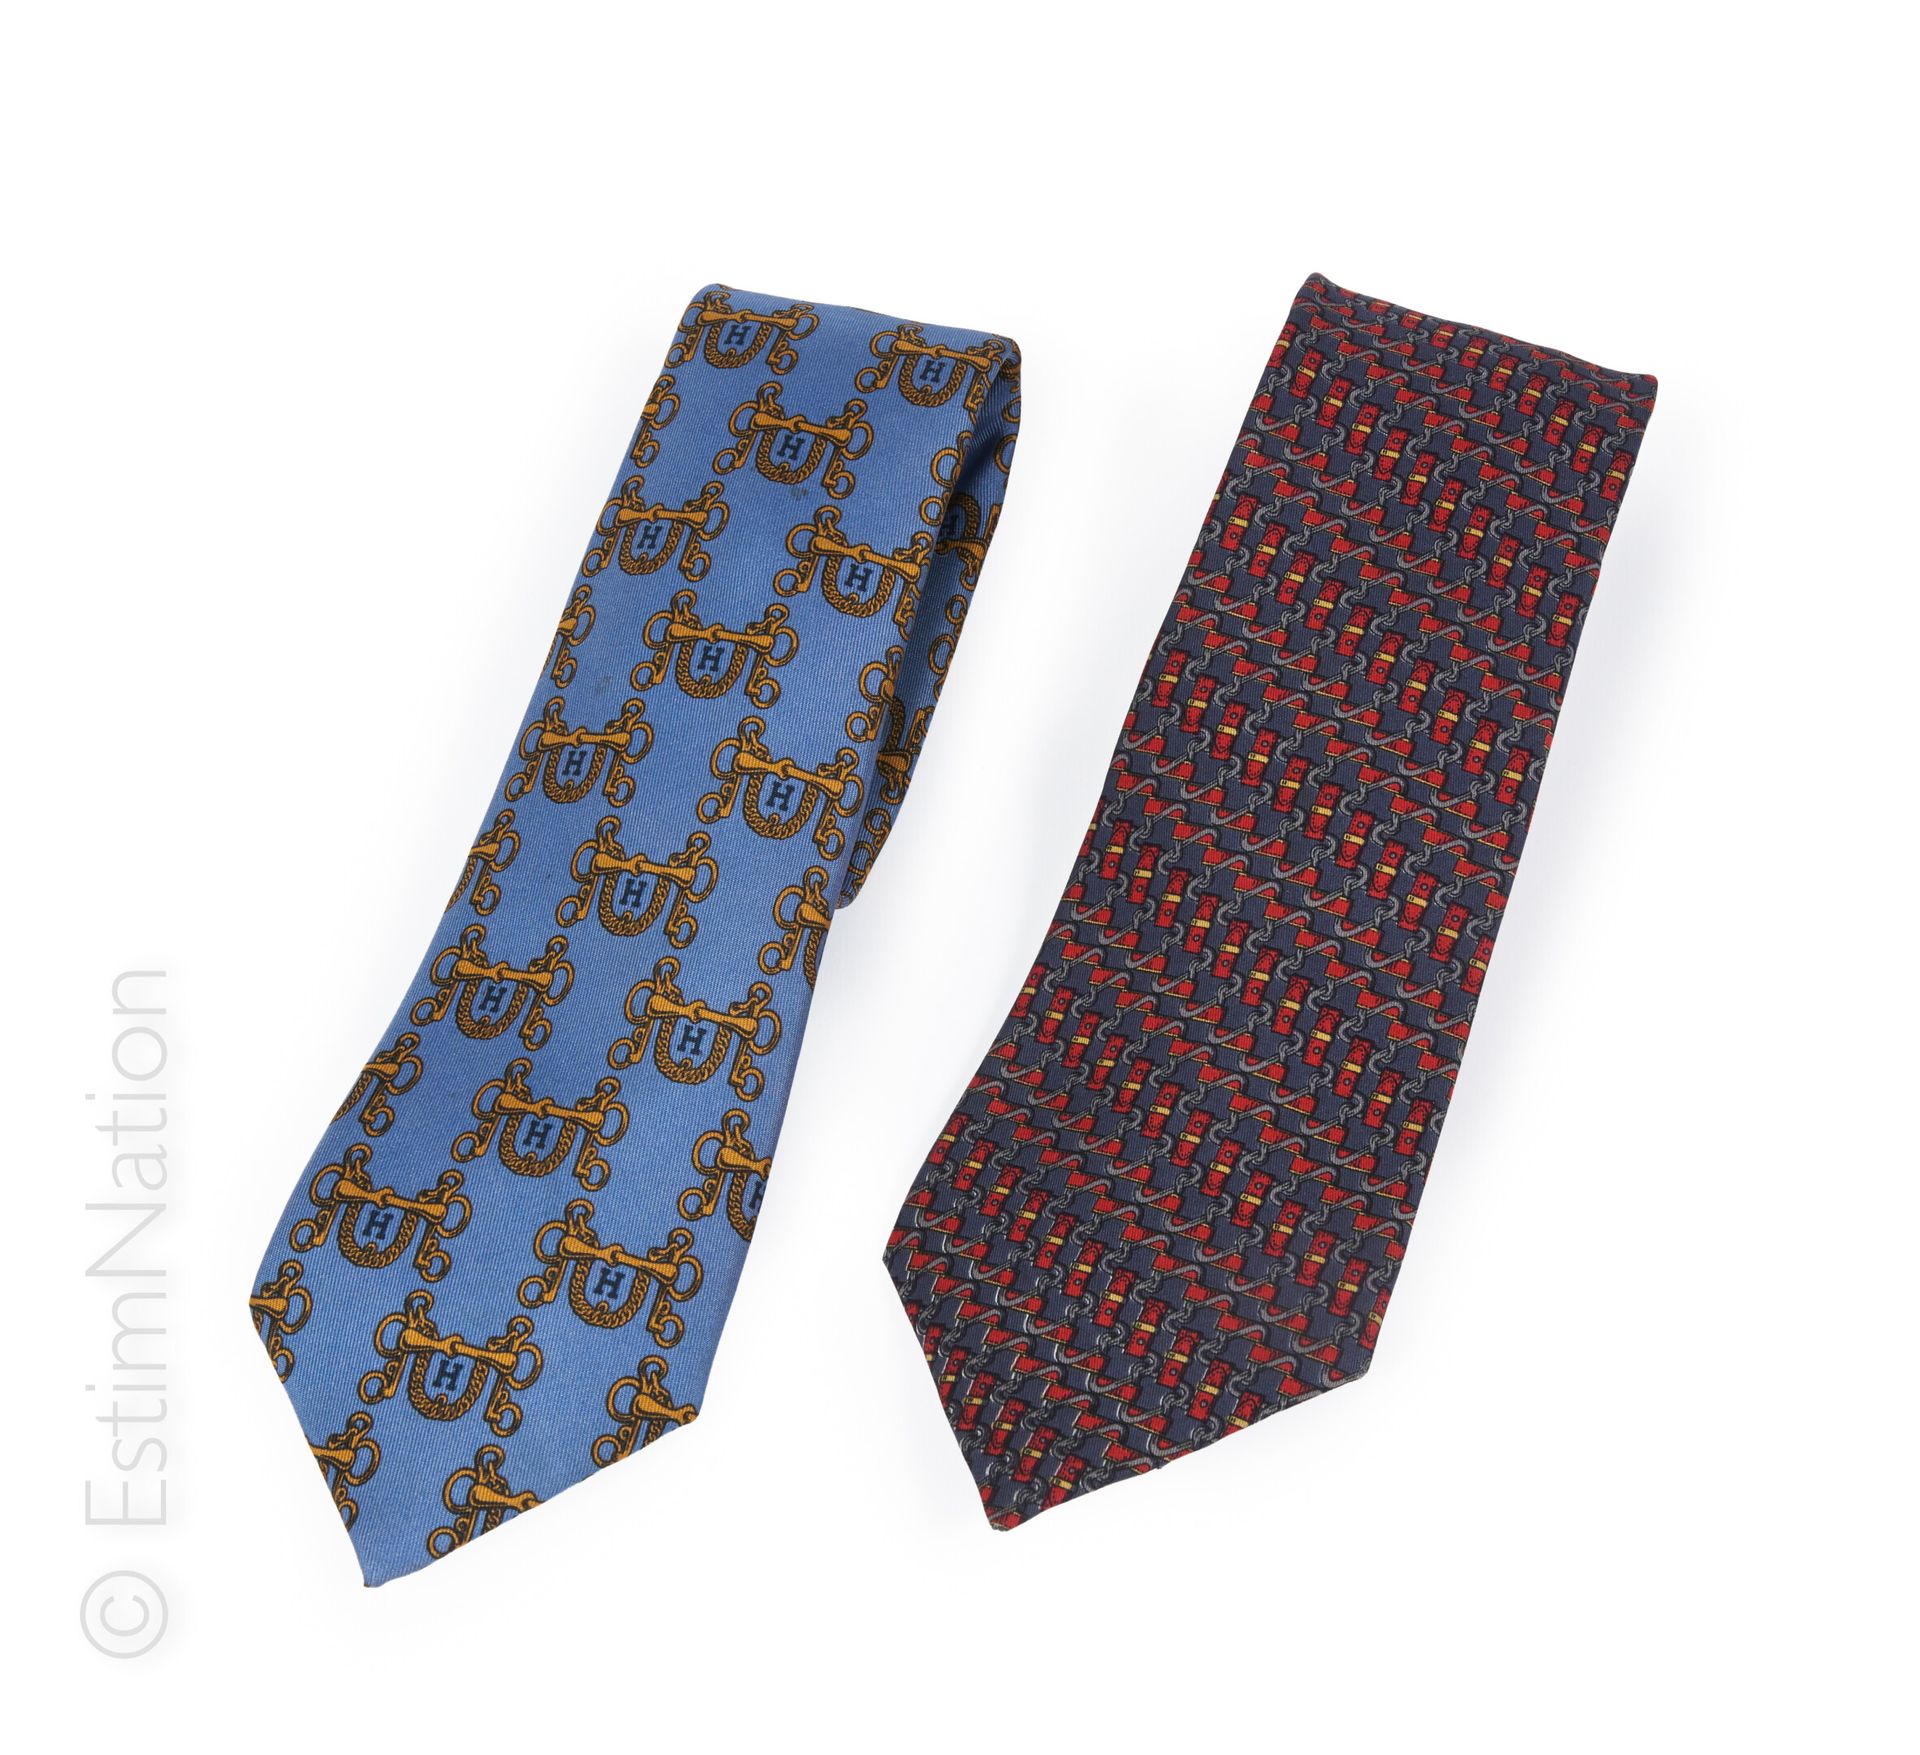 HERMES Paris TWO CRAVATES in printed silk twill (No condition guarantee)